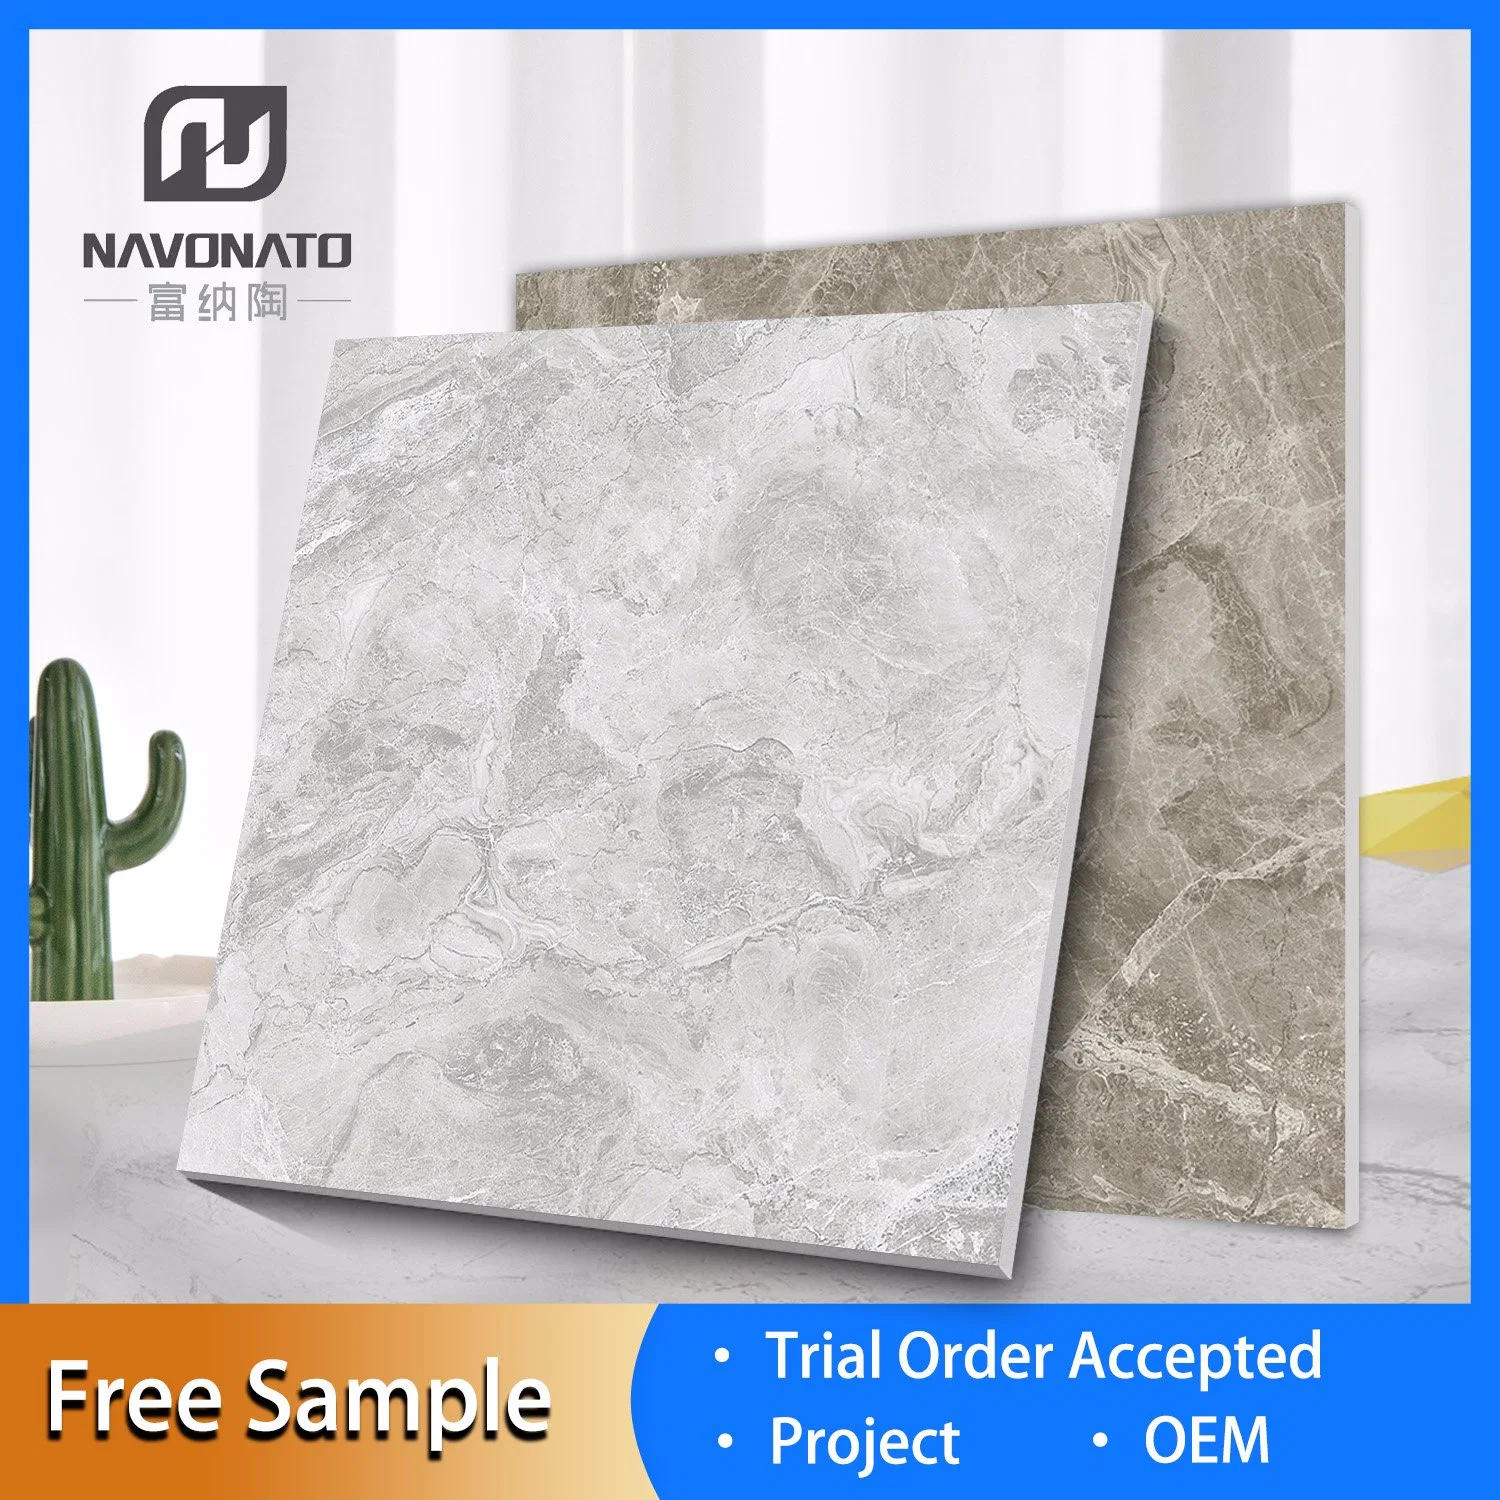 Porcelain Full Body Polished Glazed Ceramic Floor Wall Tile for Modern House Apartment Hotel School Home Bathroom Kitchen Decor New Product Decoration